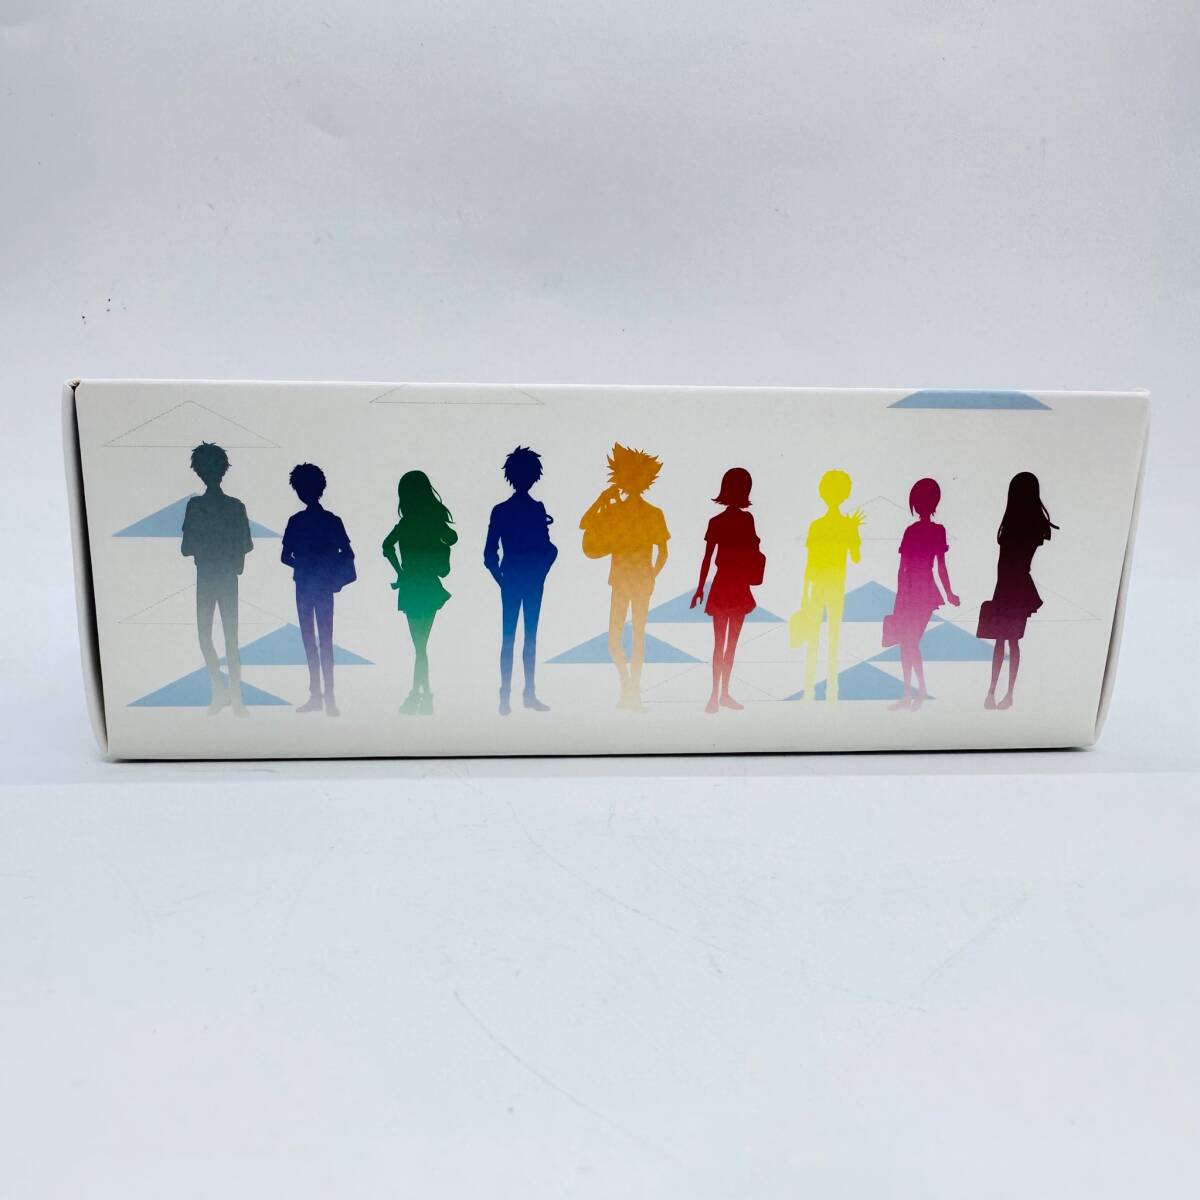  digimon adventure Complete selection animation tejiva chair Bandai higashi . animation unused goods box equipped 1 jpy exhibition 